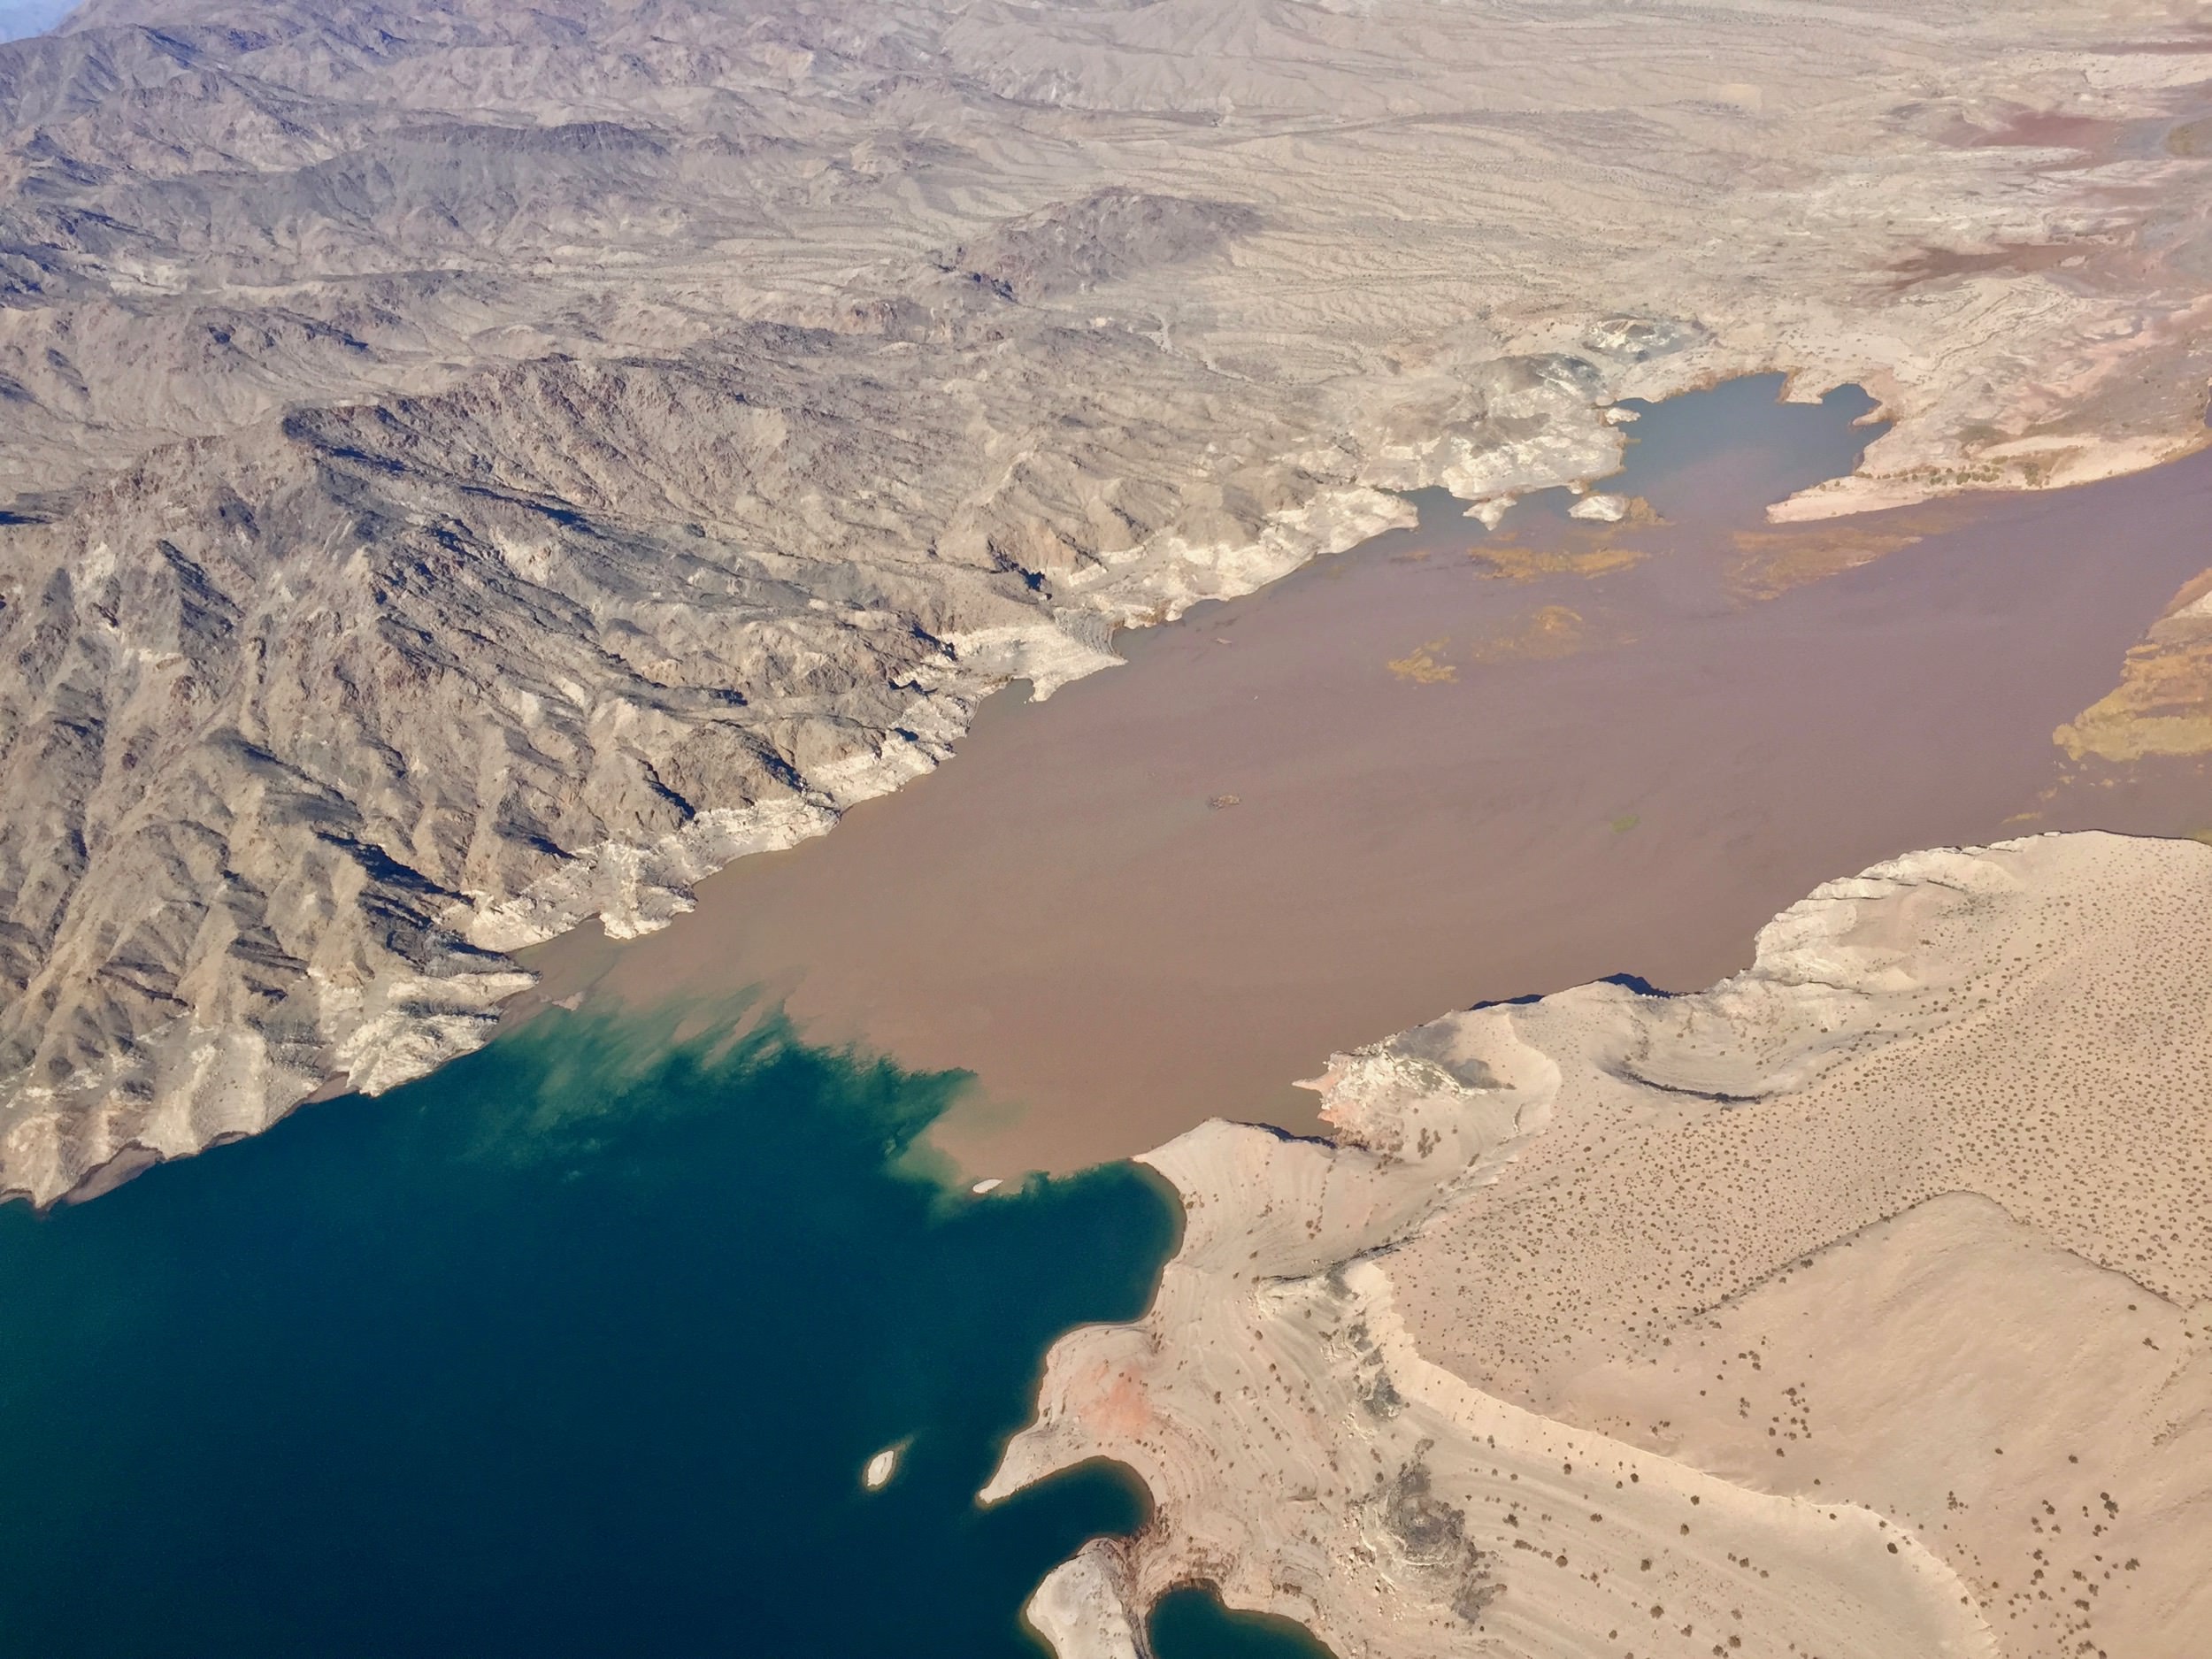 The water of the Colorado River meets the water of Lake Mead